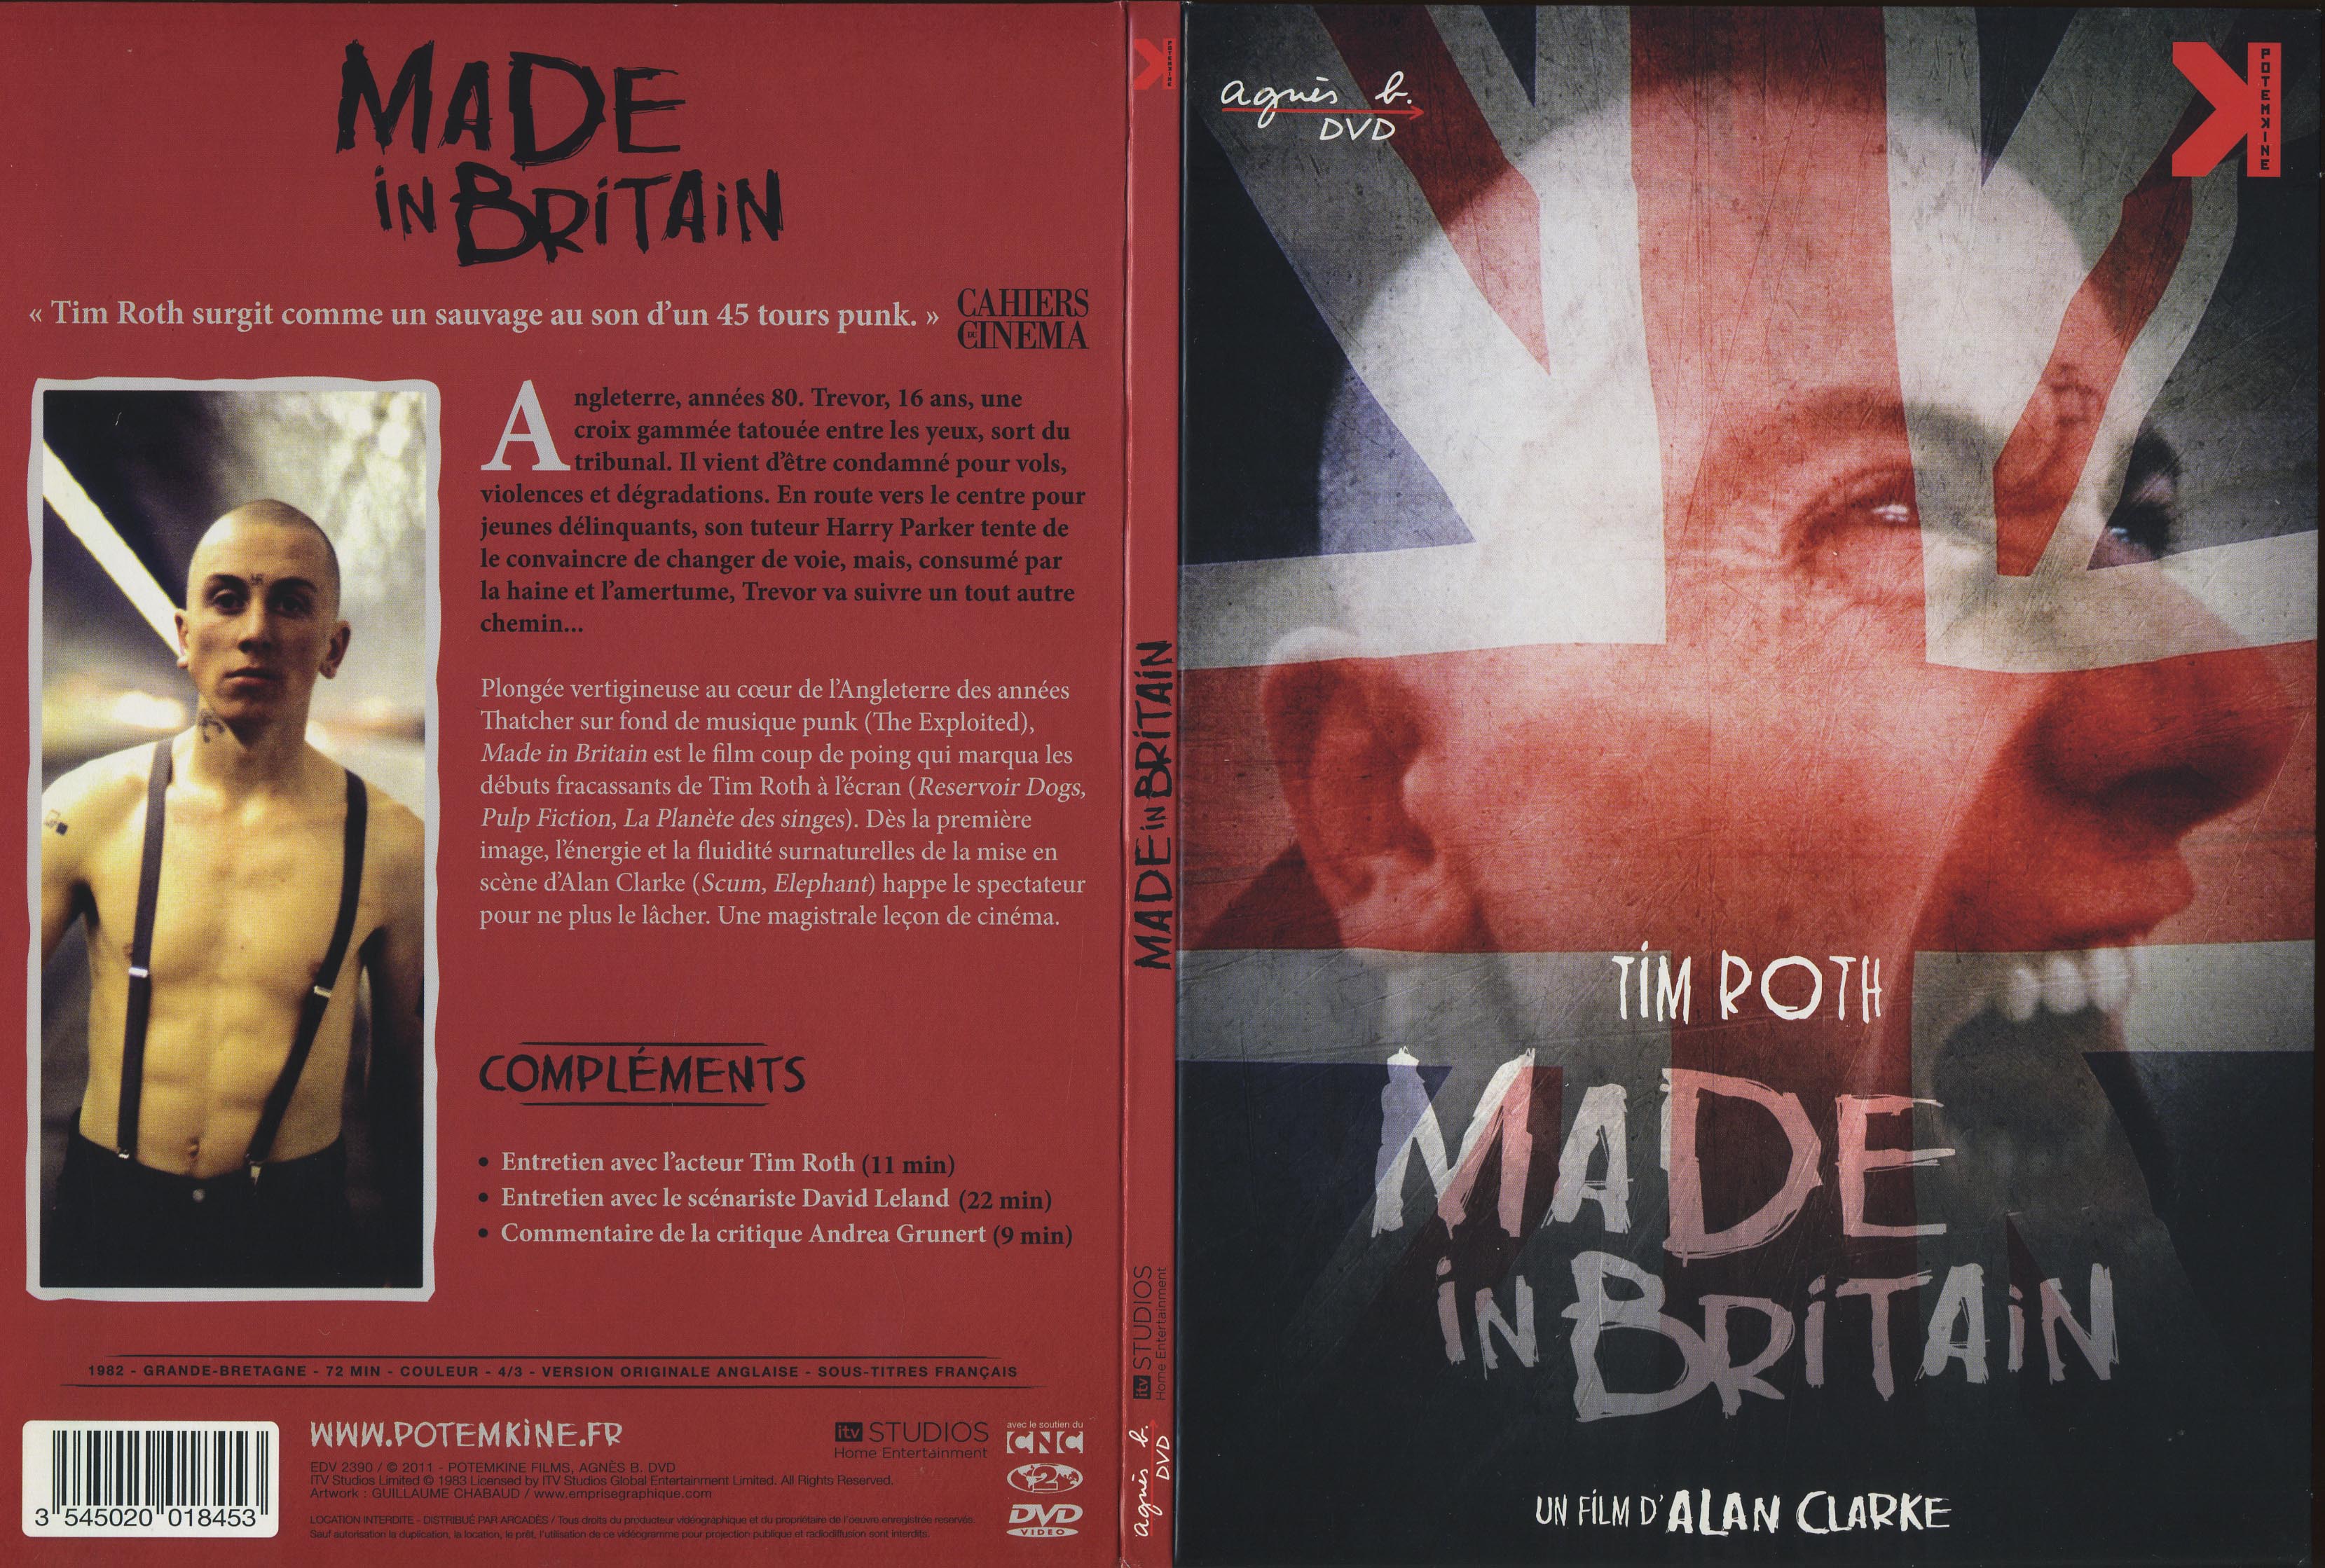 Jaquette DVD Made in Britain